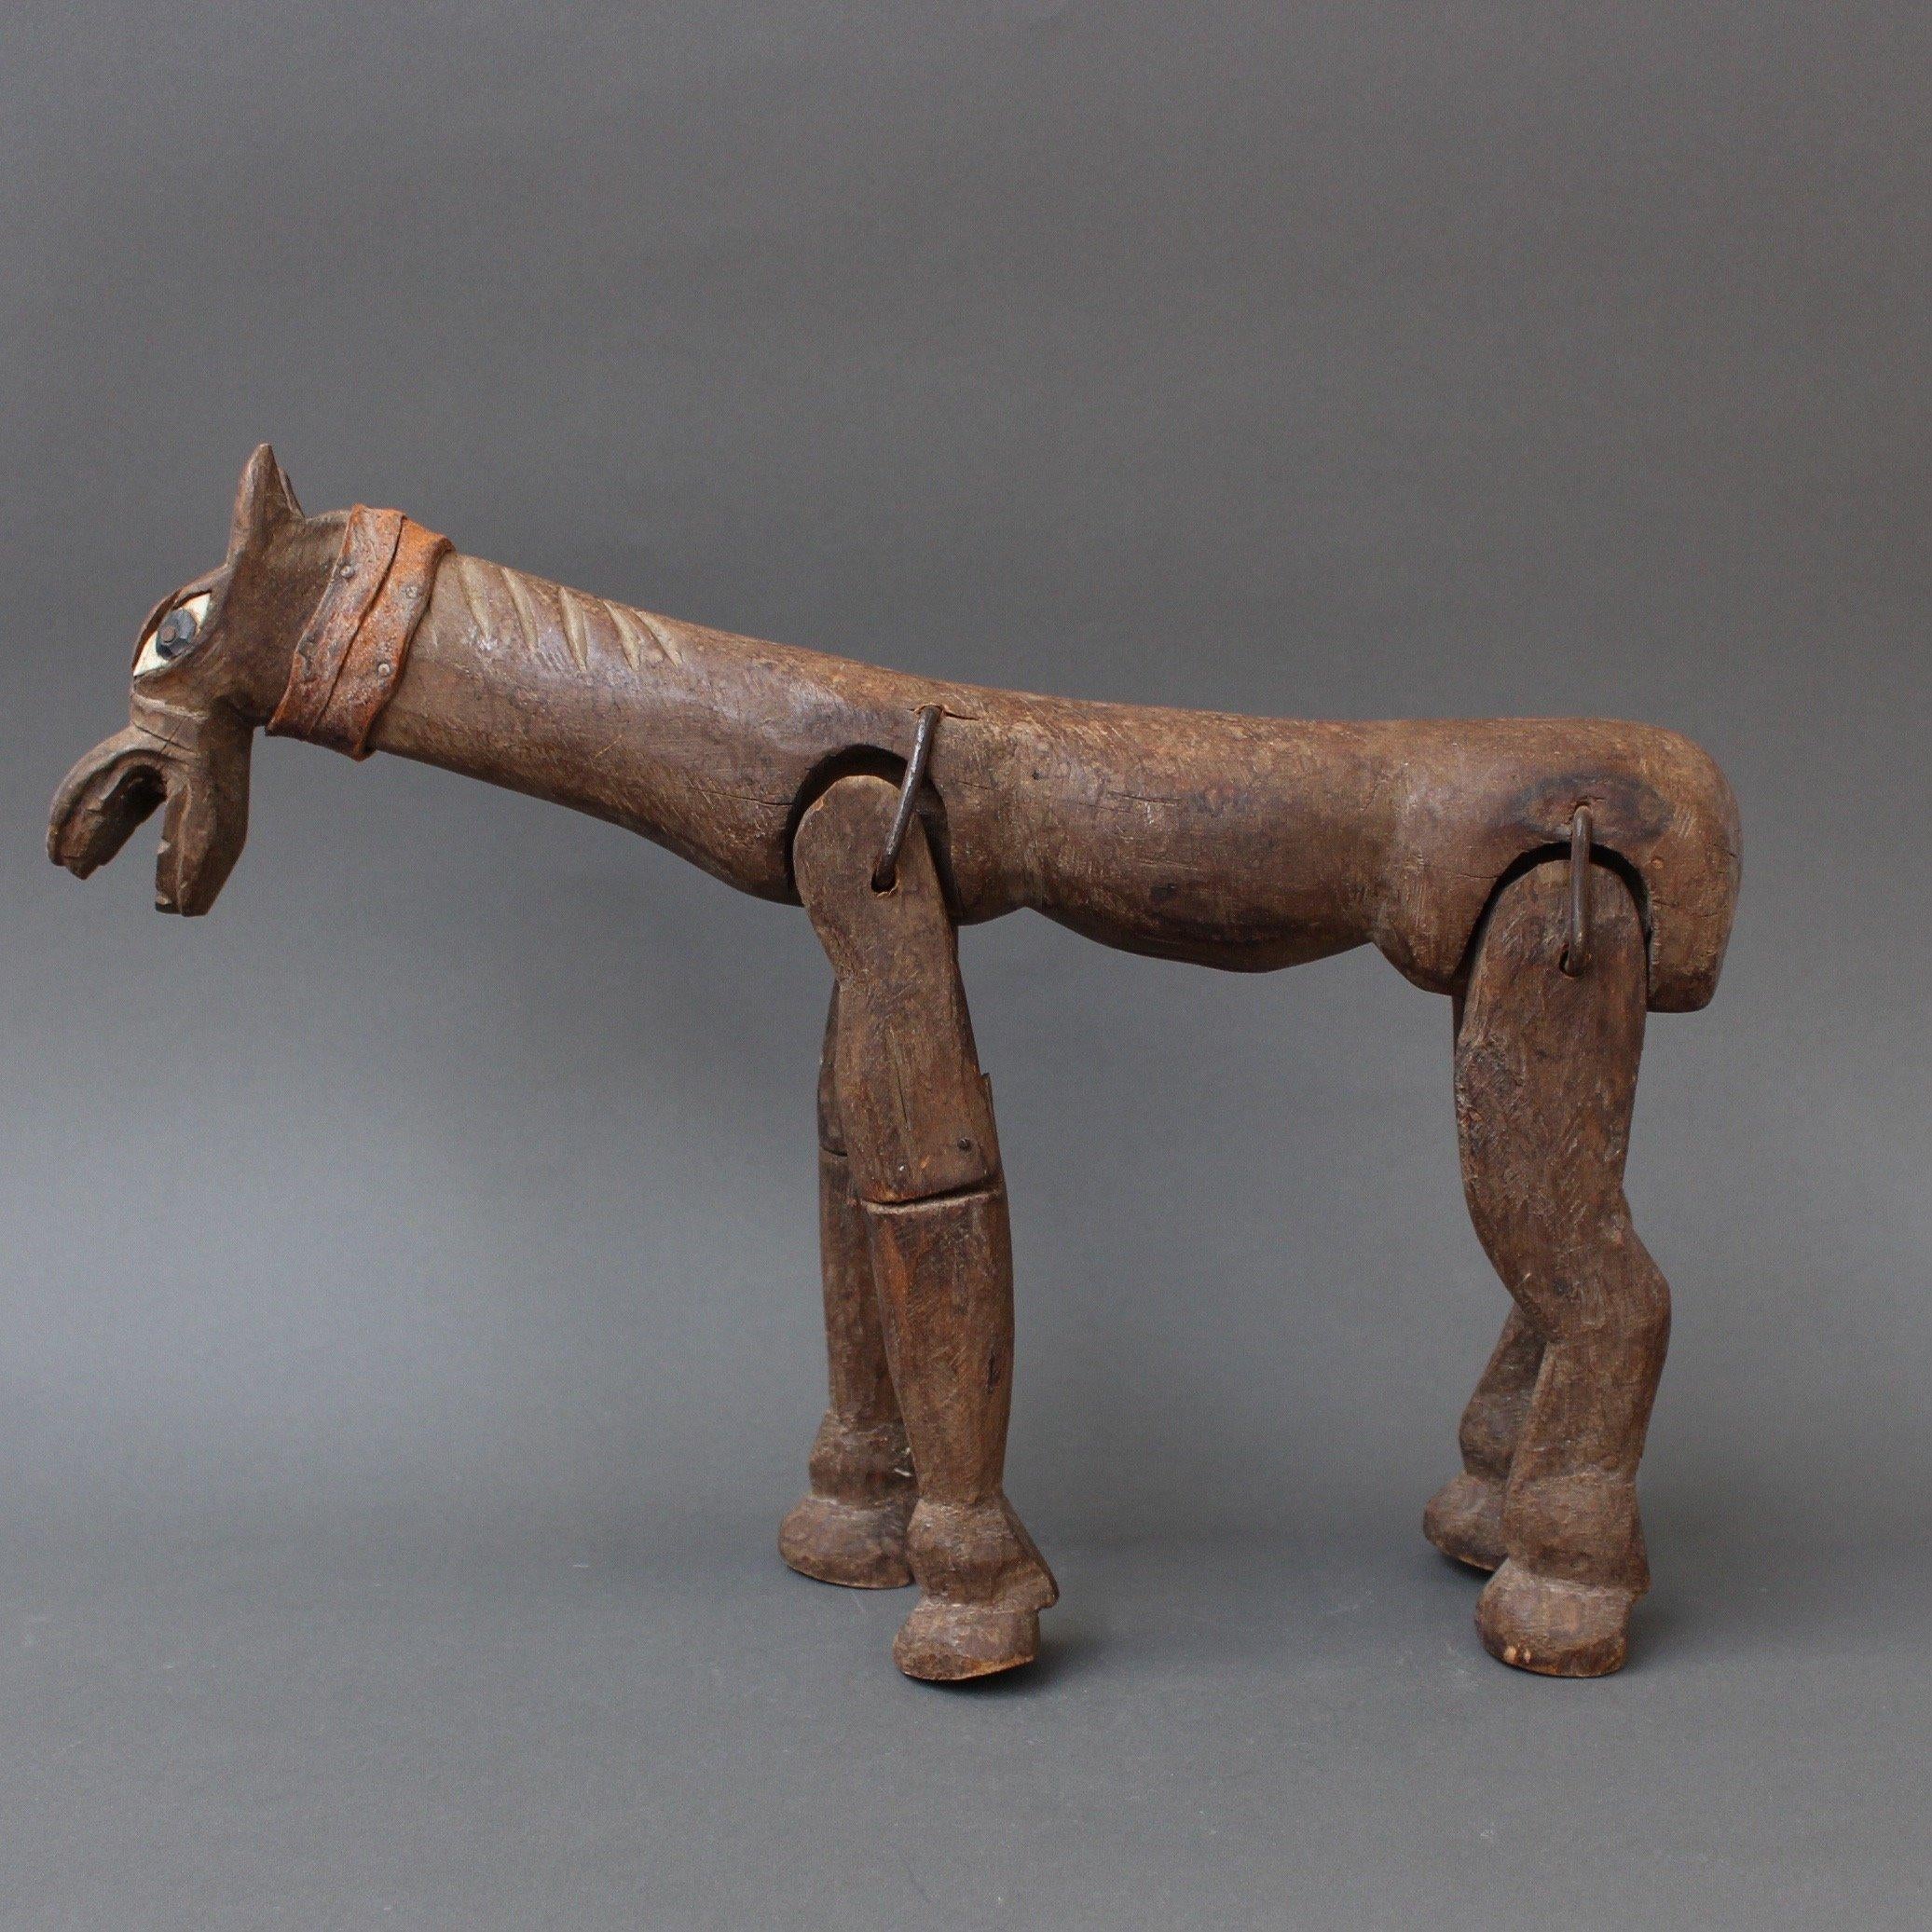 Antique, hand-carved wooden horse marionette in folk art or primitive style, circa 1800s, probably French. The legs are attached to the body with pieces of iron enabling their movement for puppet shows. This is a unique piece and is completely